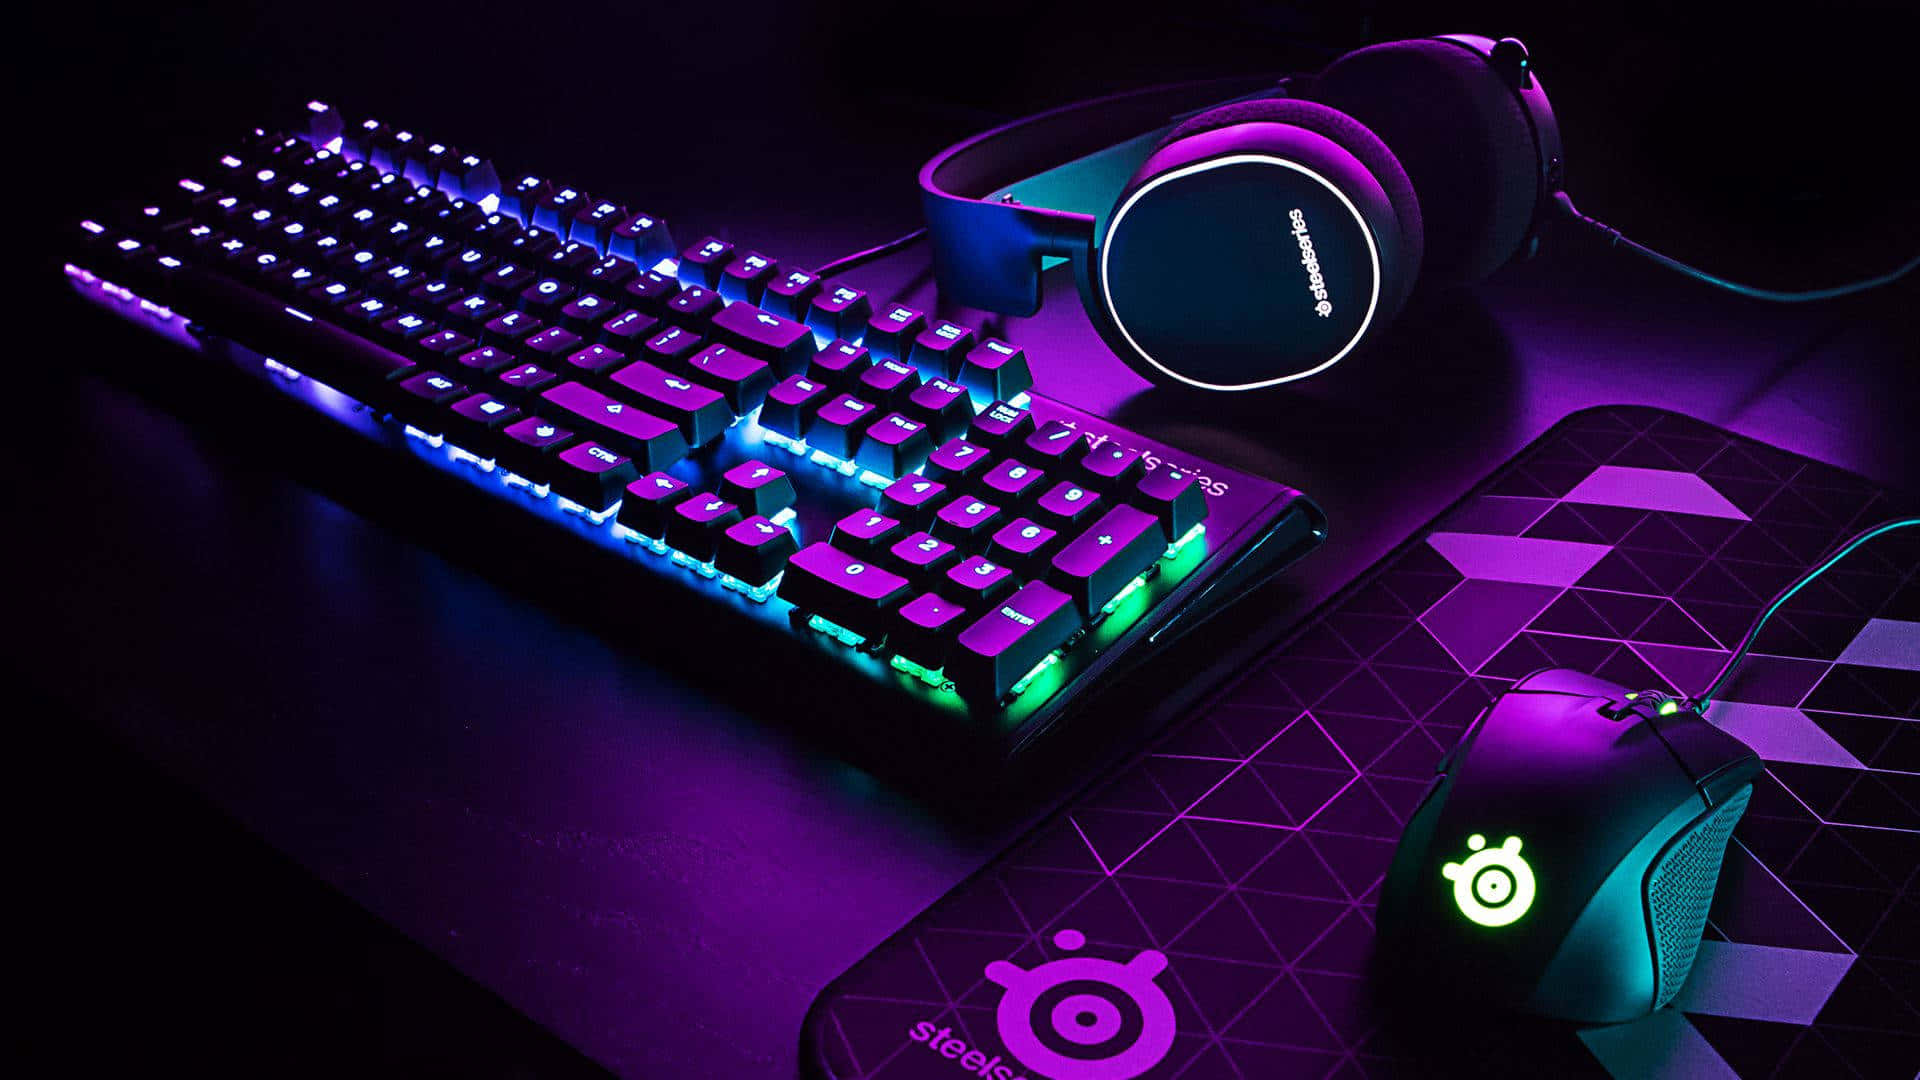 A Computer Keyboard And Mouse With Purple Lights Wallpaper